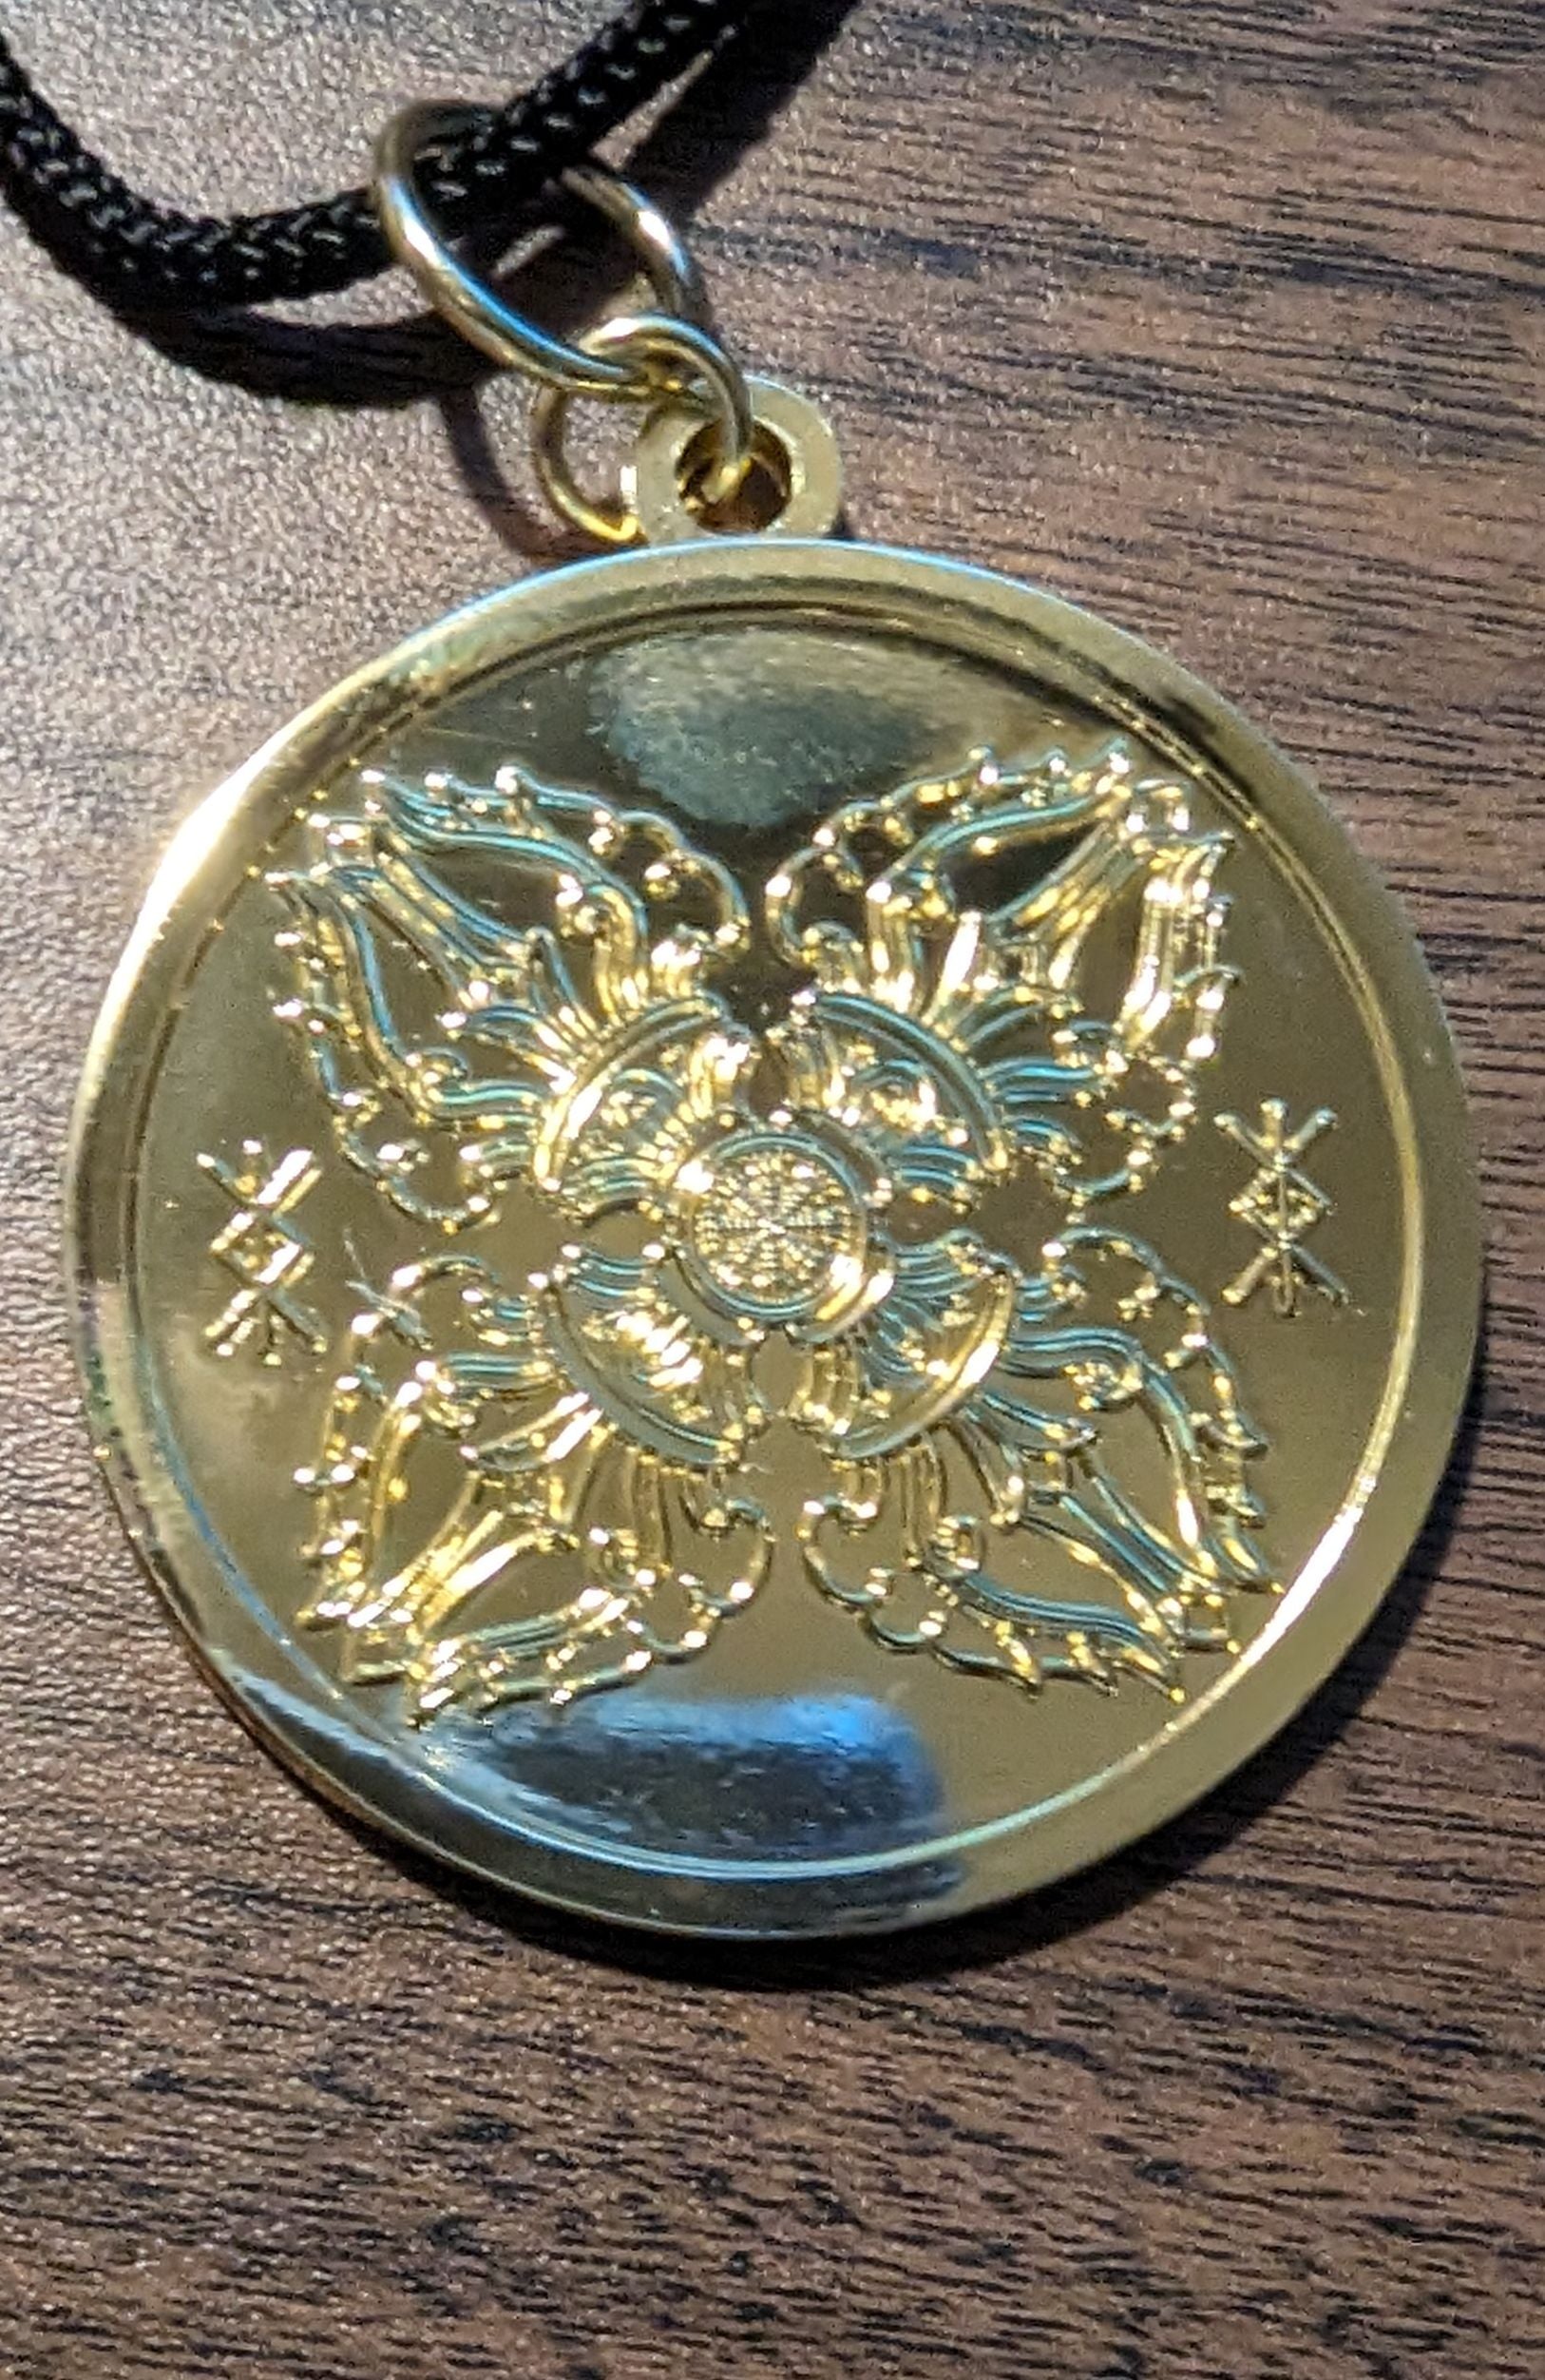 The Reflection Protection Medallion